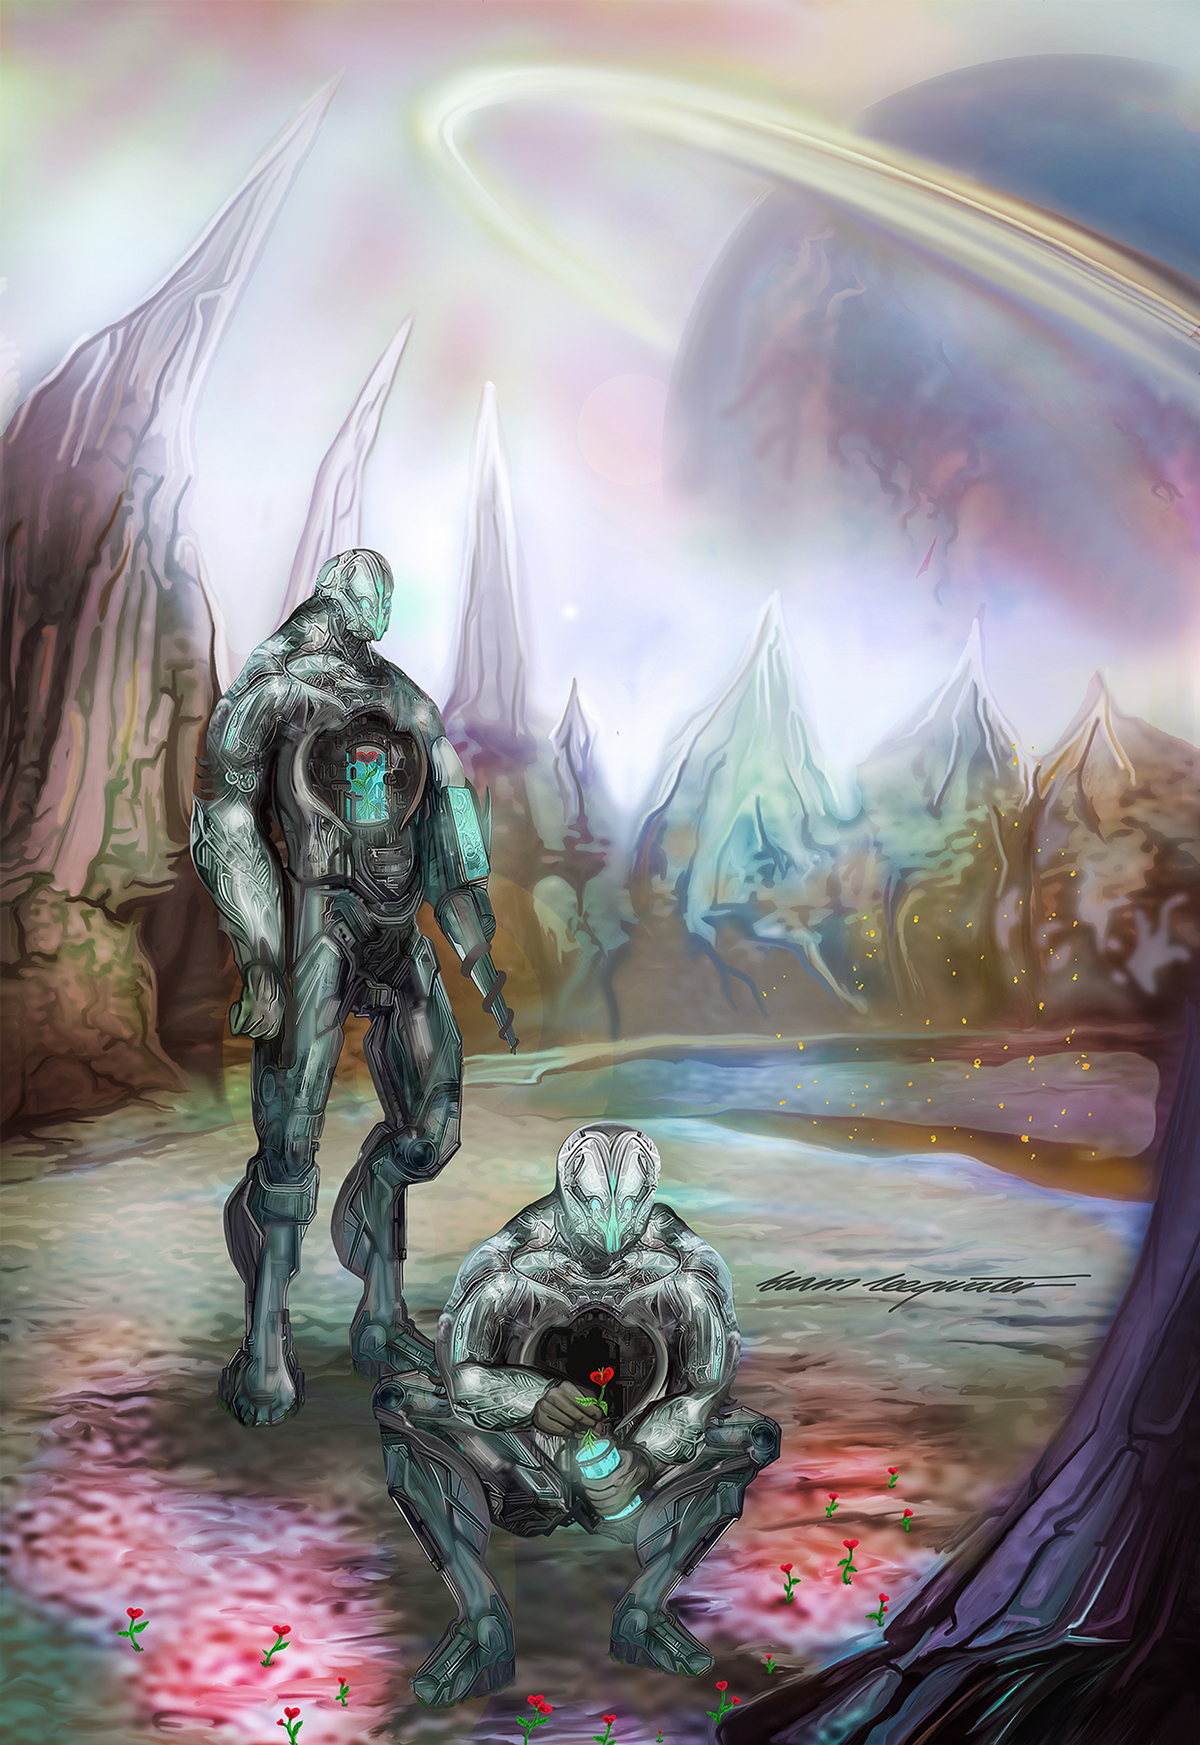 robots we come in peace android droids digital robots new star wars concept art bram leegwater digital painting robot art colors fantasy sci-fi Sci Fi